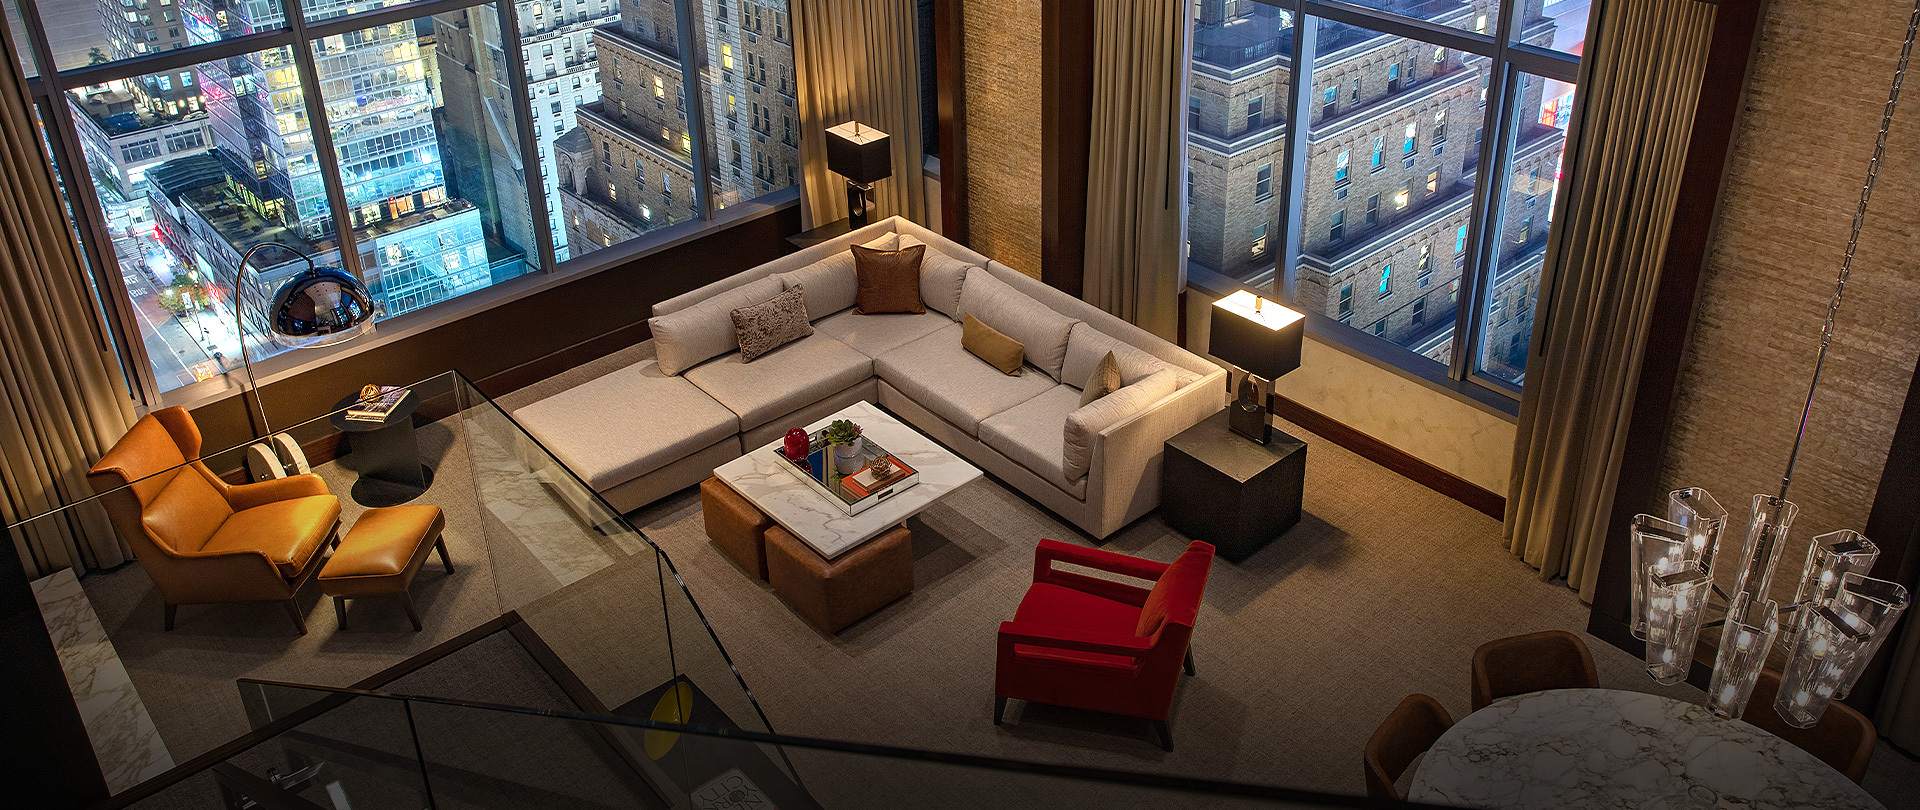 A light gray, beige l-shaped couch with brown pillows. floor to ceiling windows, and red accents in the suite